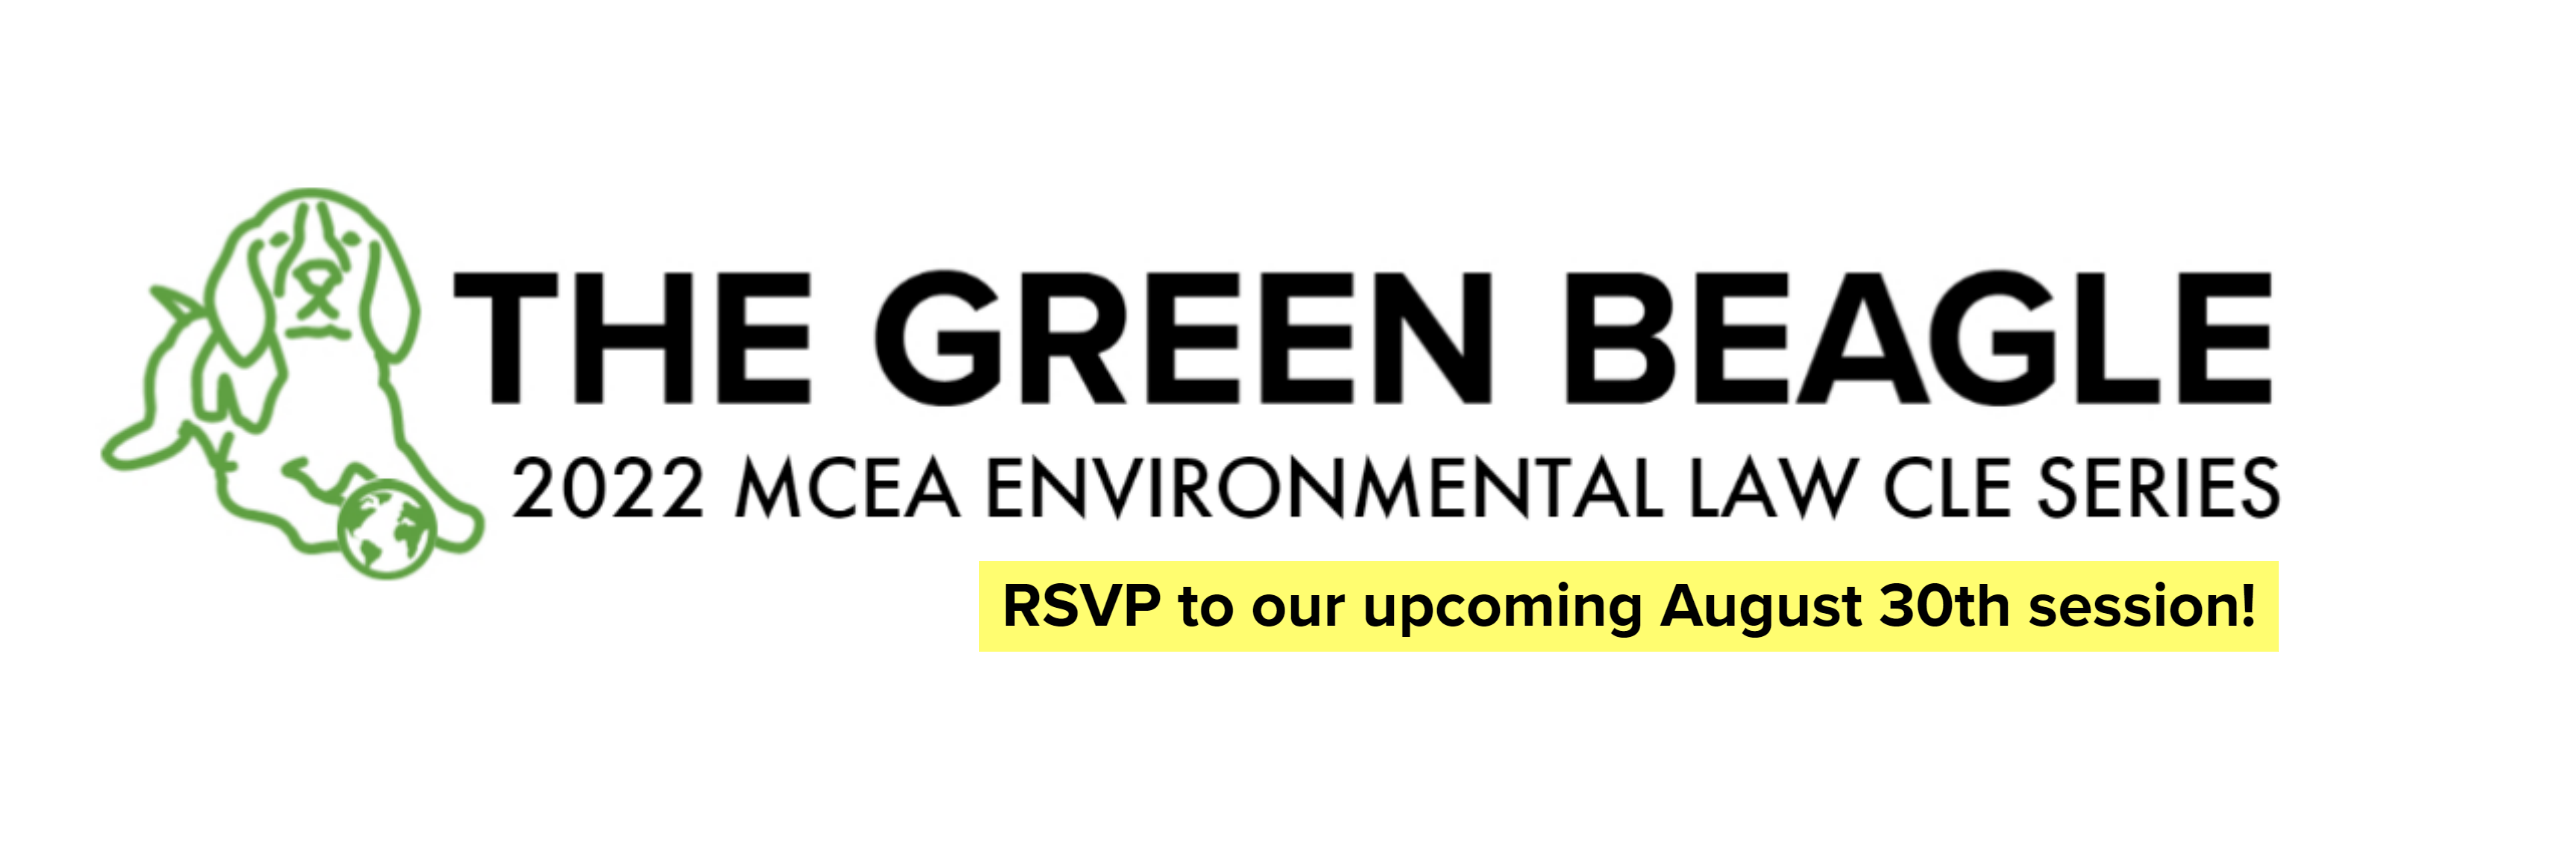 The Green Beagle CLE Environmental Law Series 